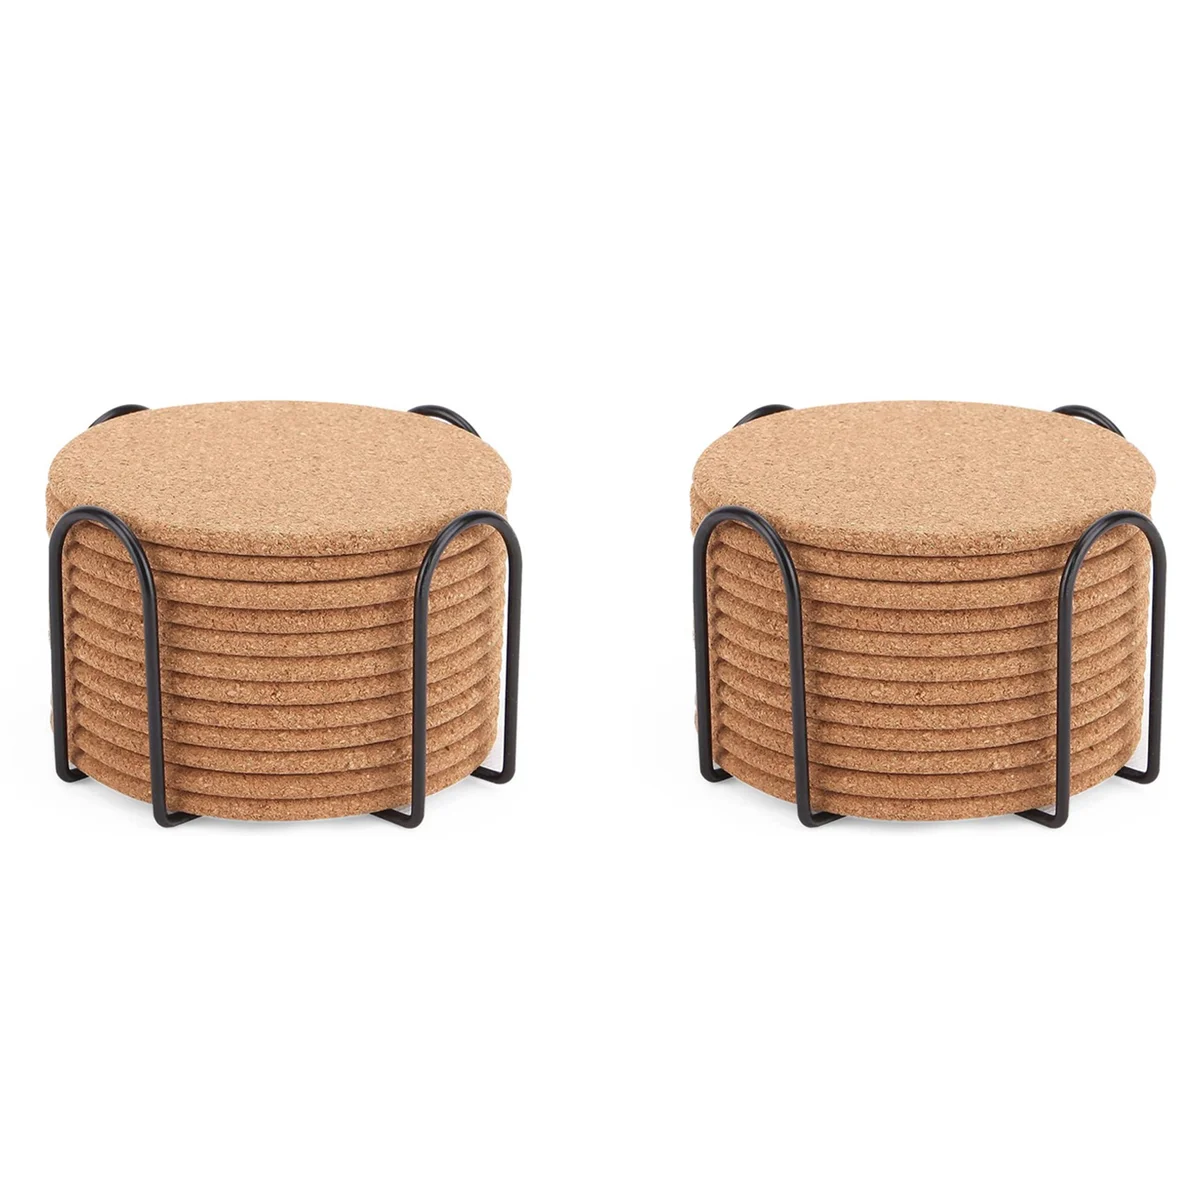 

Pack of 24 Absorbent Cork Coasters with Holder, Heat-Resistant Cup Mat Set,Reusable Round Drink Coaster Fits for Mug